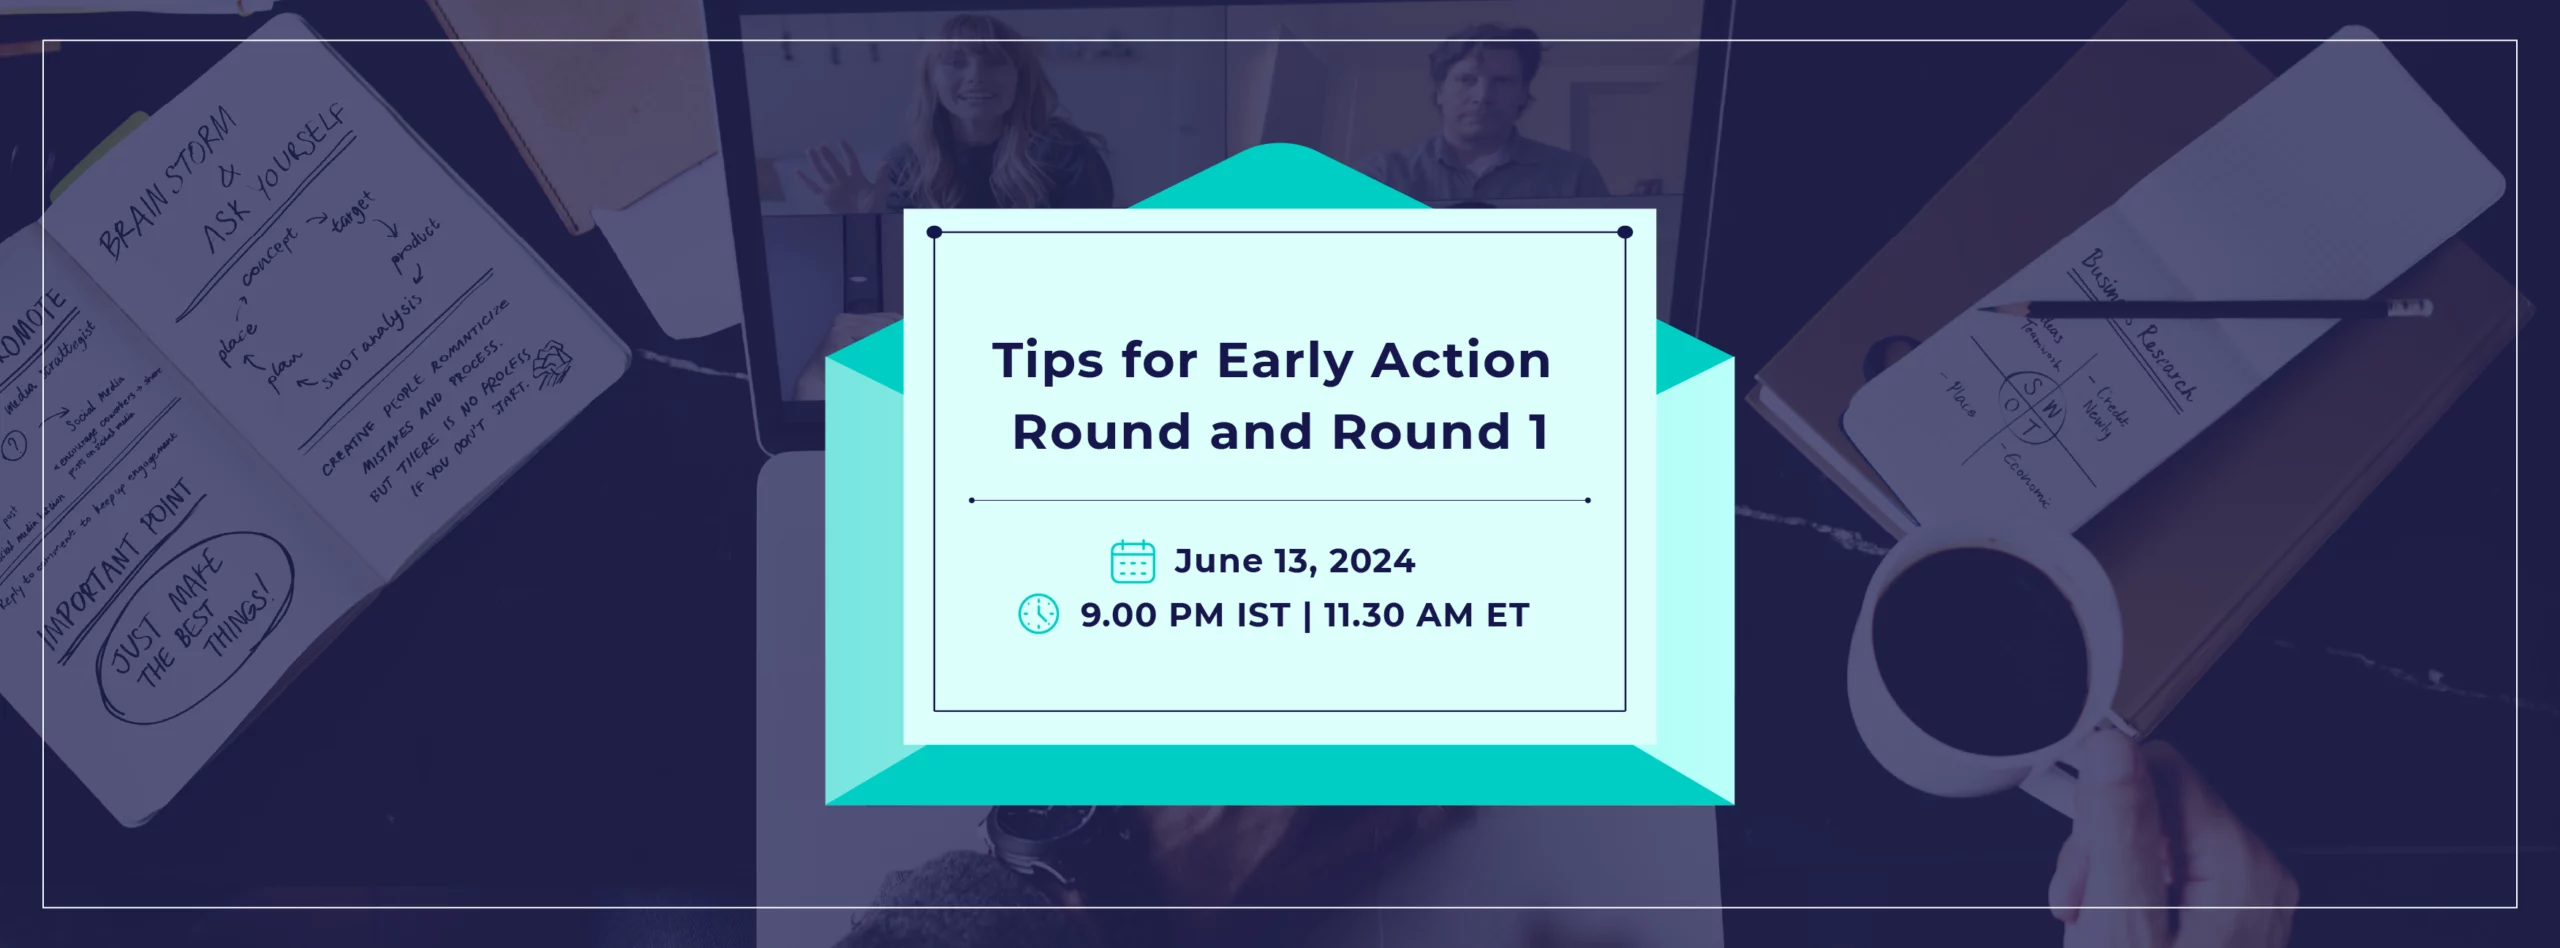 Tips for Early Action Round and Round 1